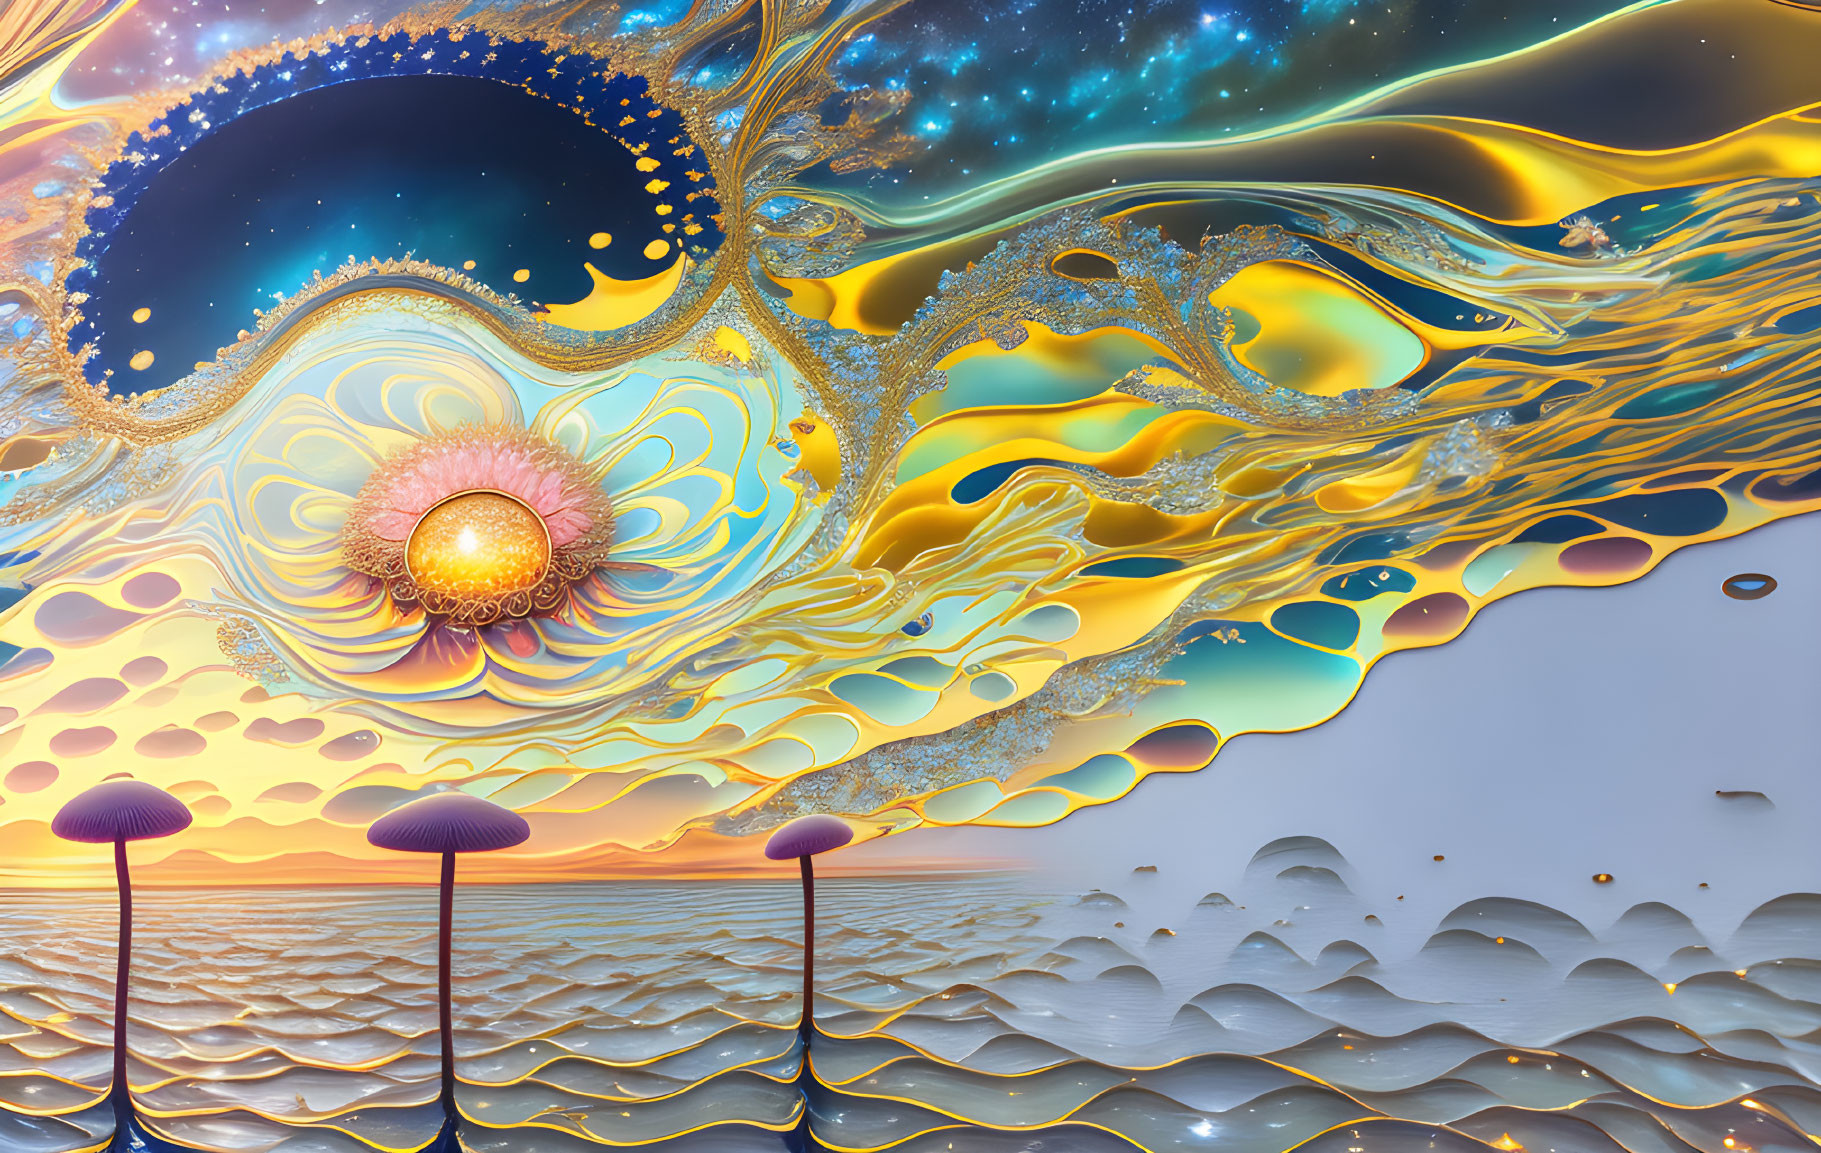 Abstract surreal landscape with cosmic elements and vibrant sky